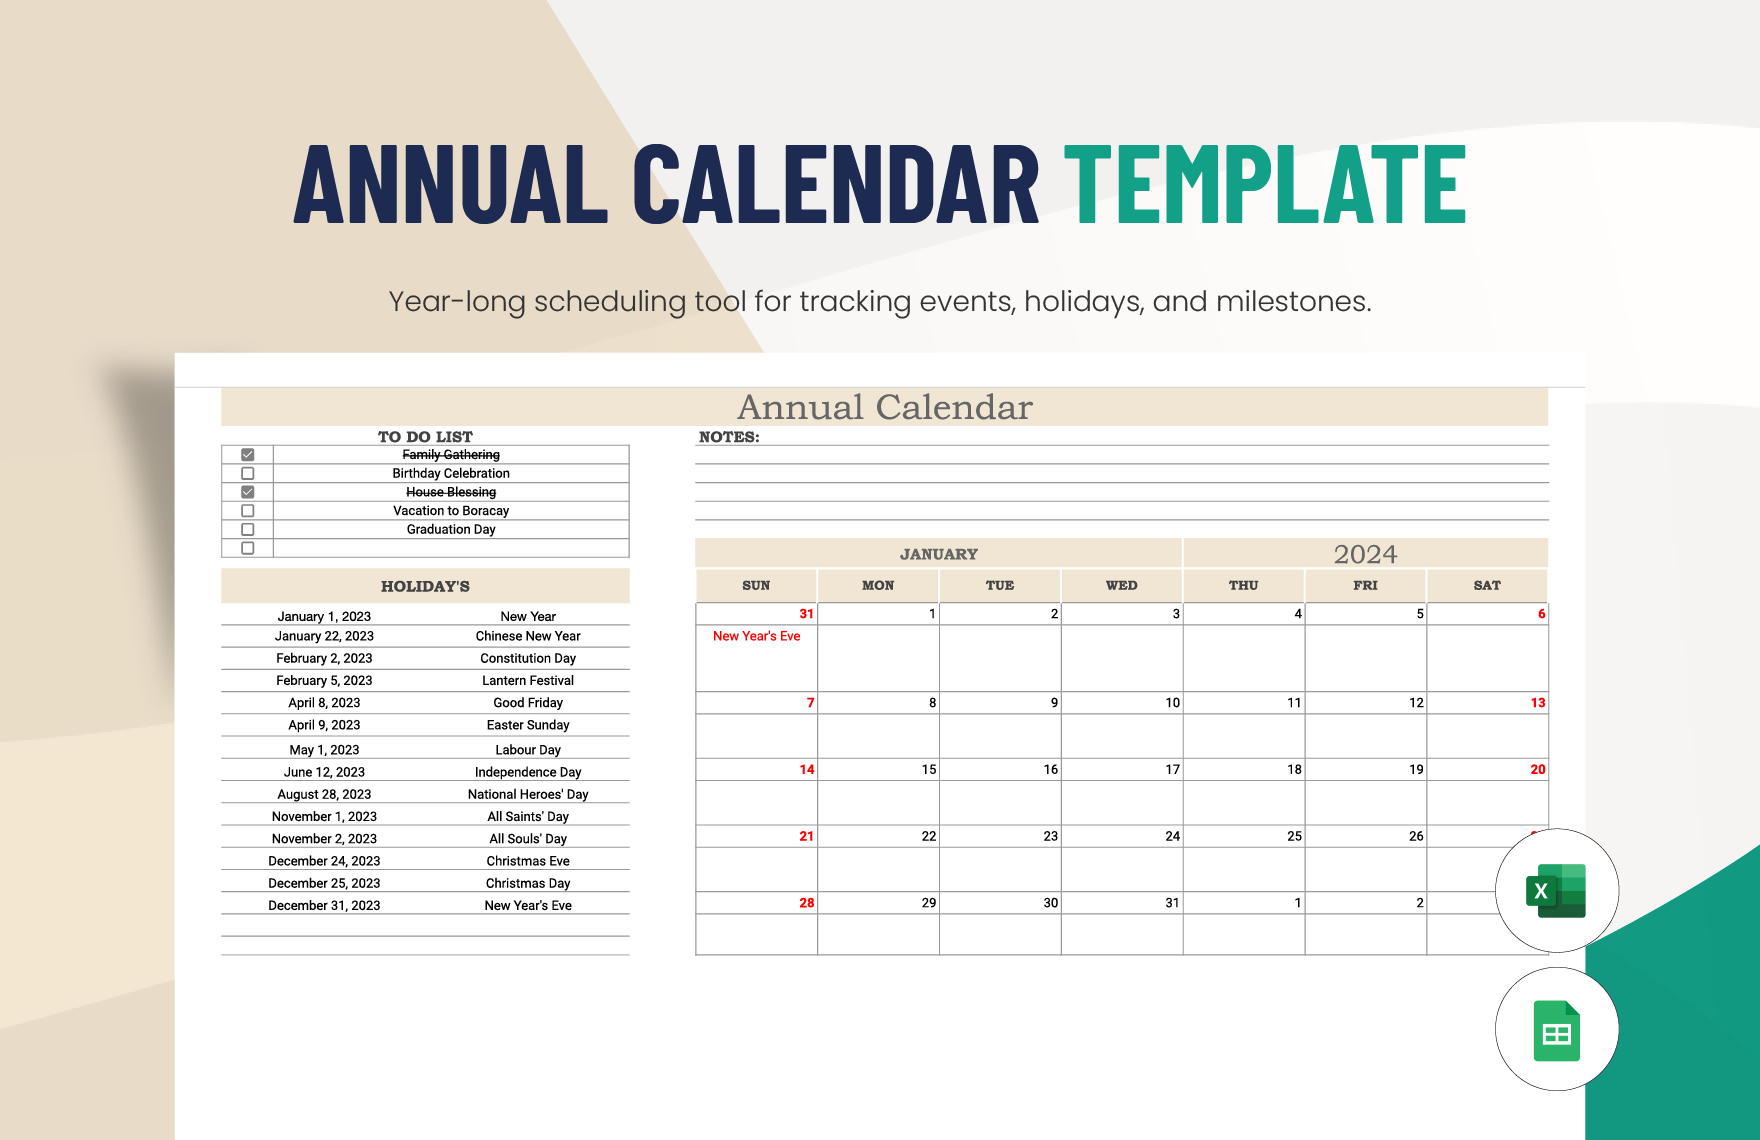 Annual Calendar  Template in Excel, Google Sheets